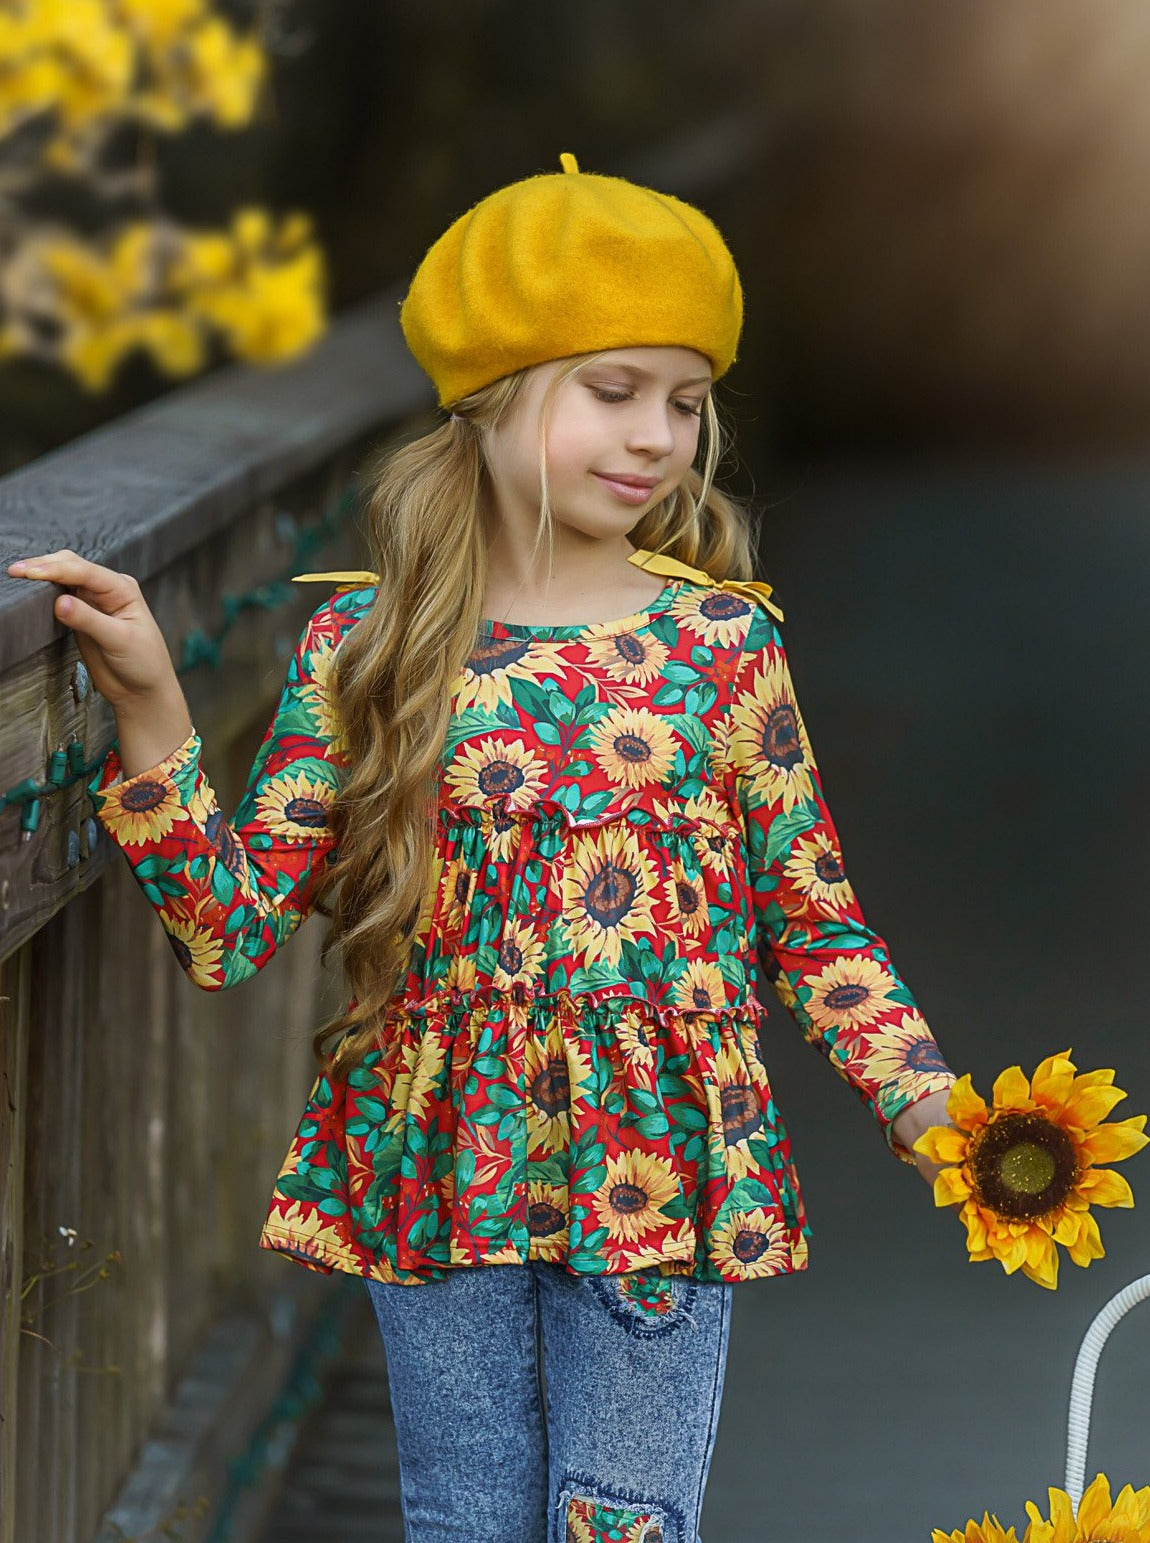 Fall Outfits | Sunflower Runic & Patched Jeans Set | Cute Girls Sets